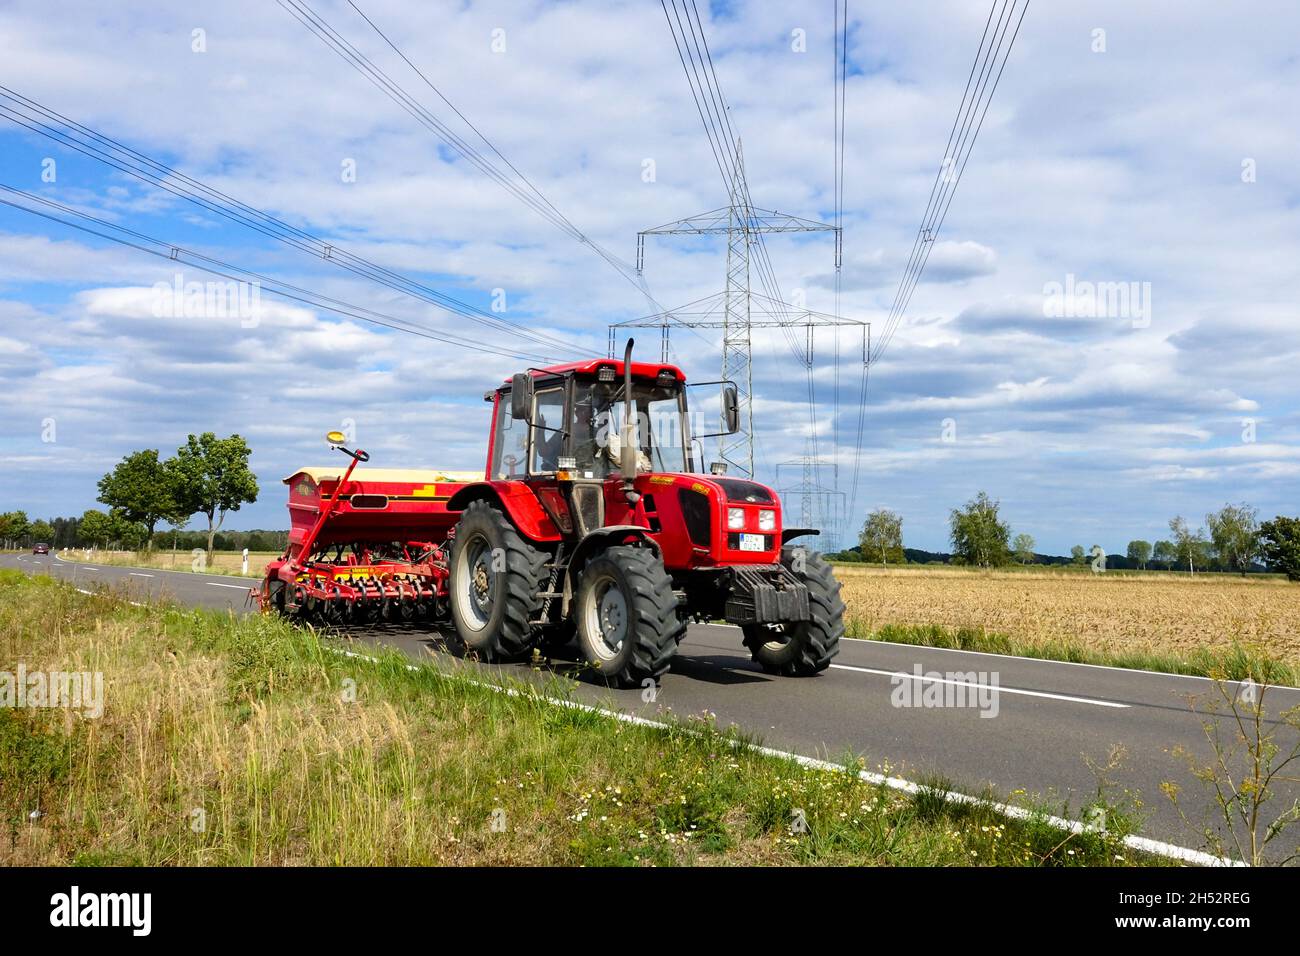 Seed drill tractor agricultural machine Germany farm and country road bellow powerlines Stock Photo